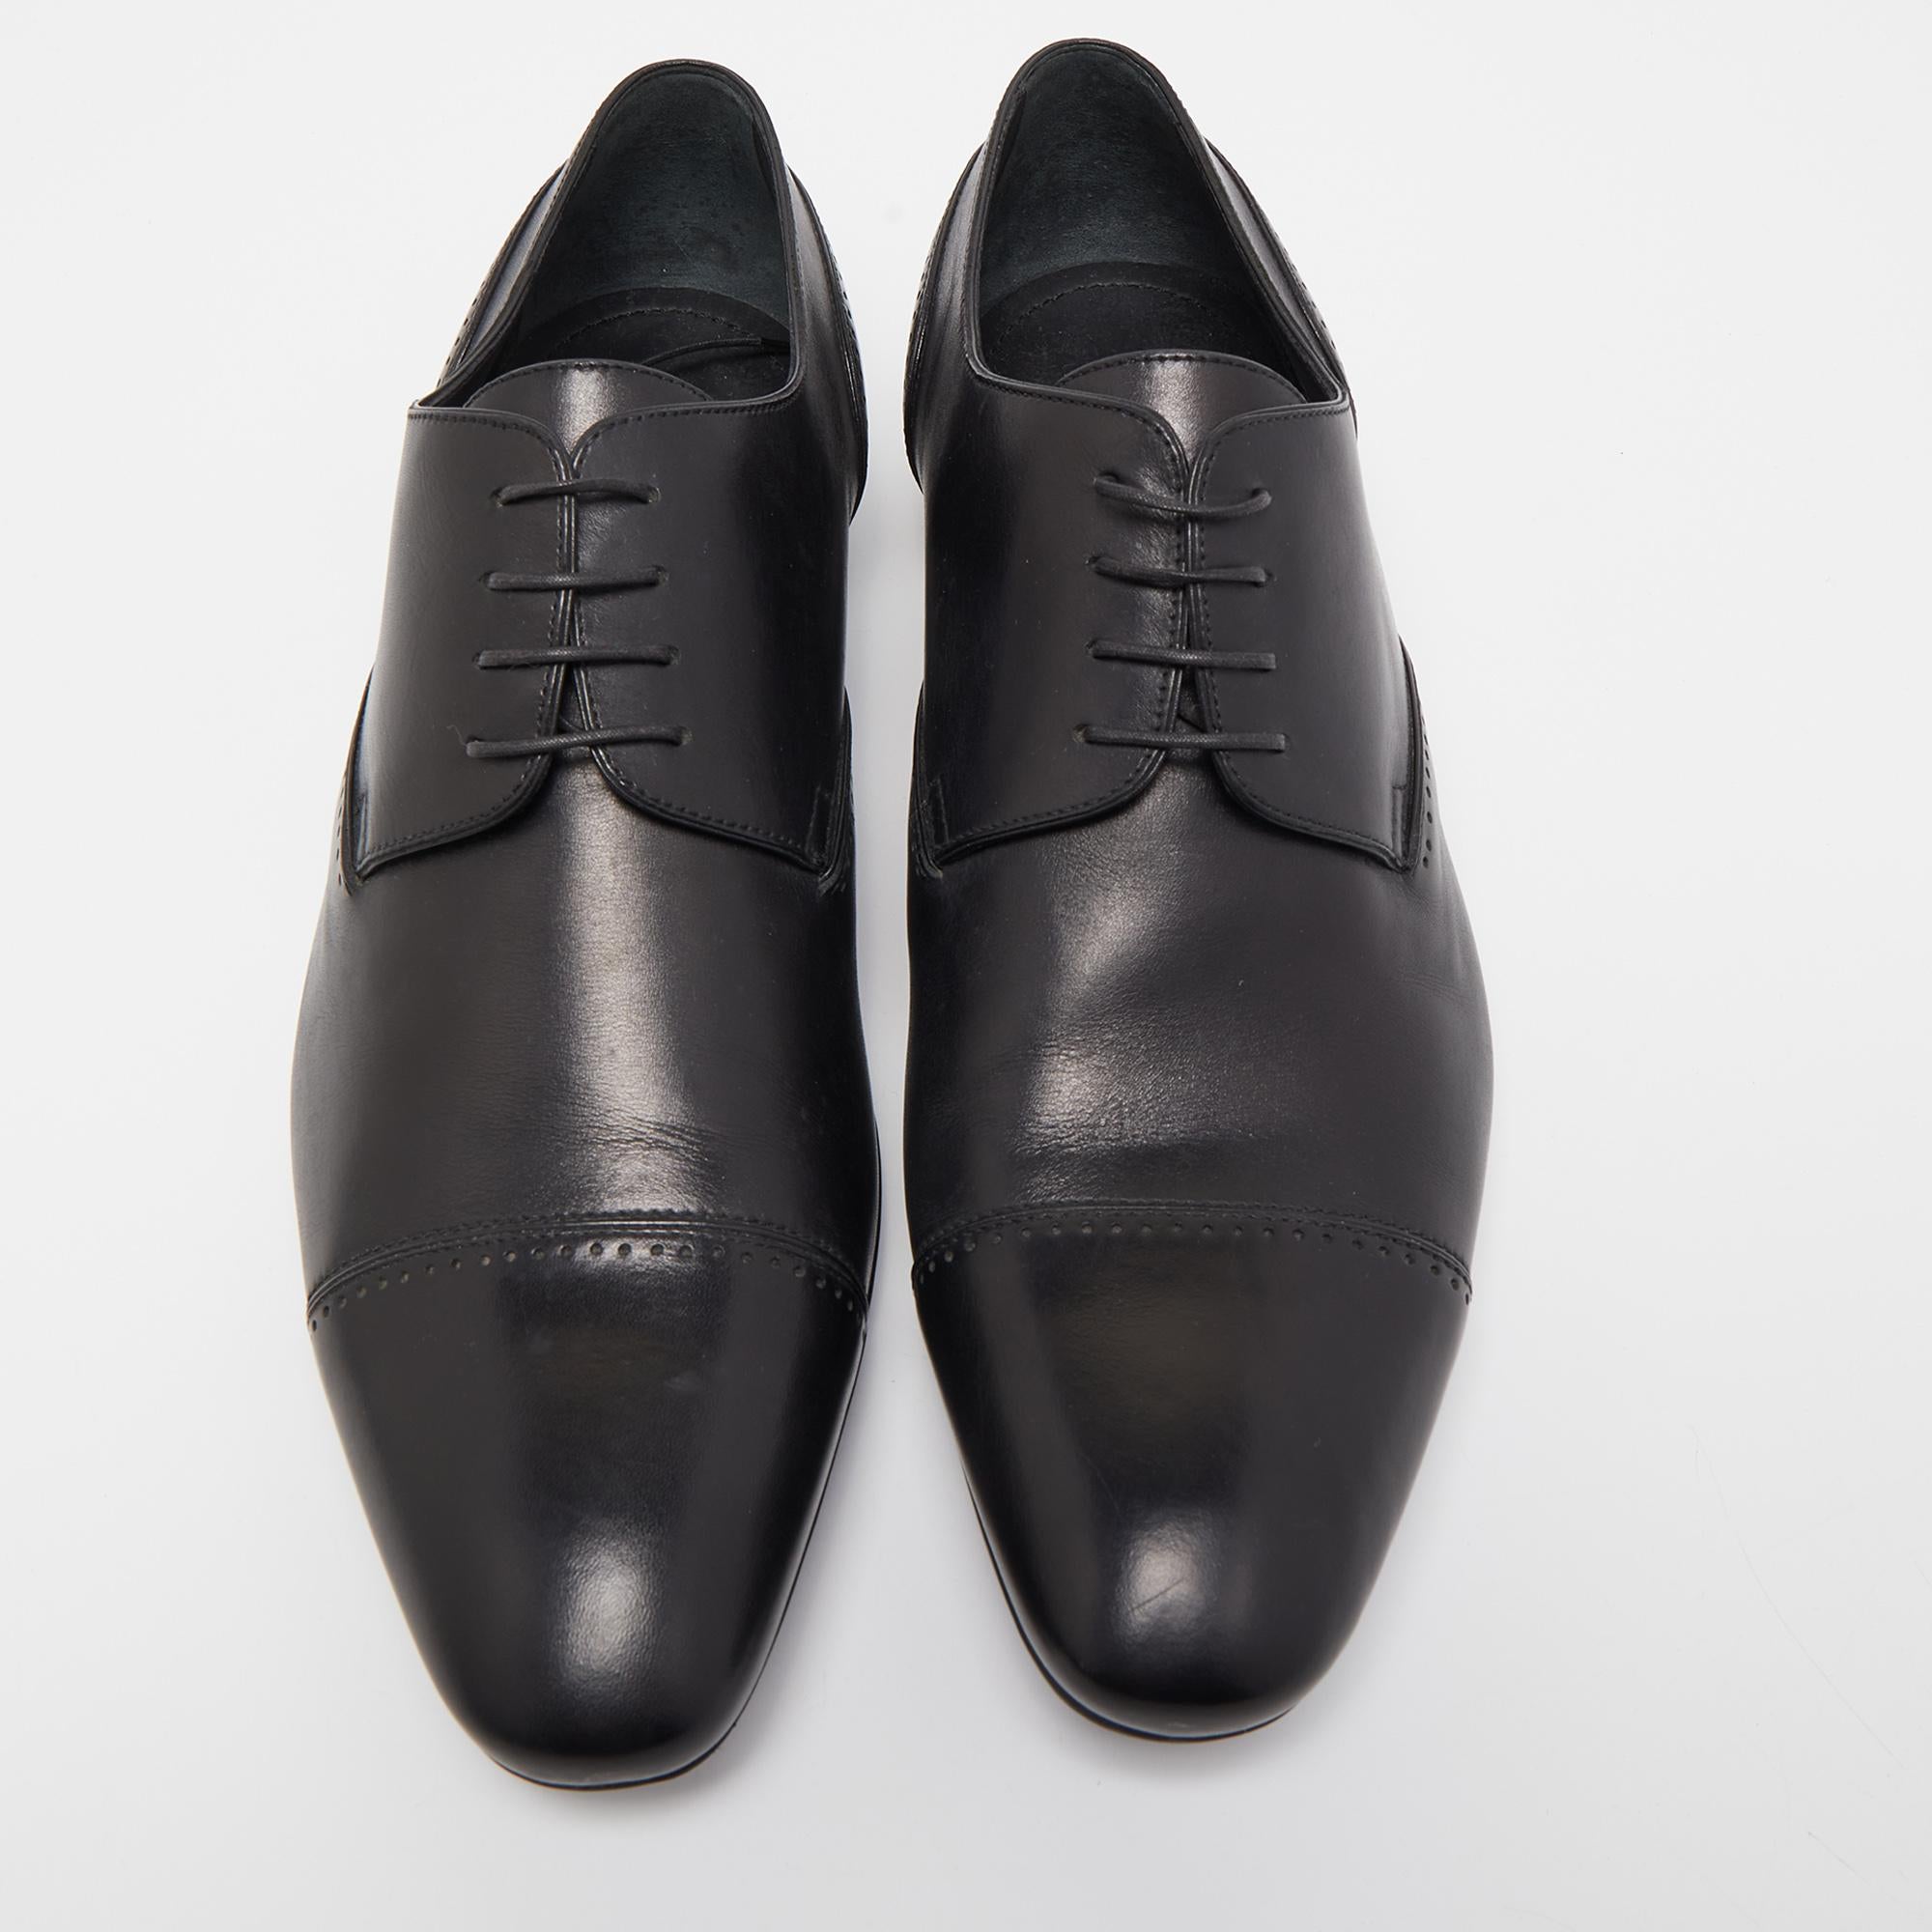 Let this comfortable pair be your first choice when you're out for a long day. These Louis Vuitton formal shoes have well-sewn uppers beautifully set on durable soles.

Includes: Original Dustbag

